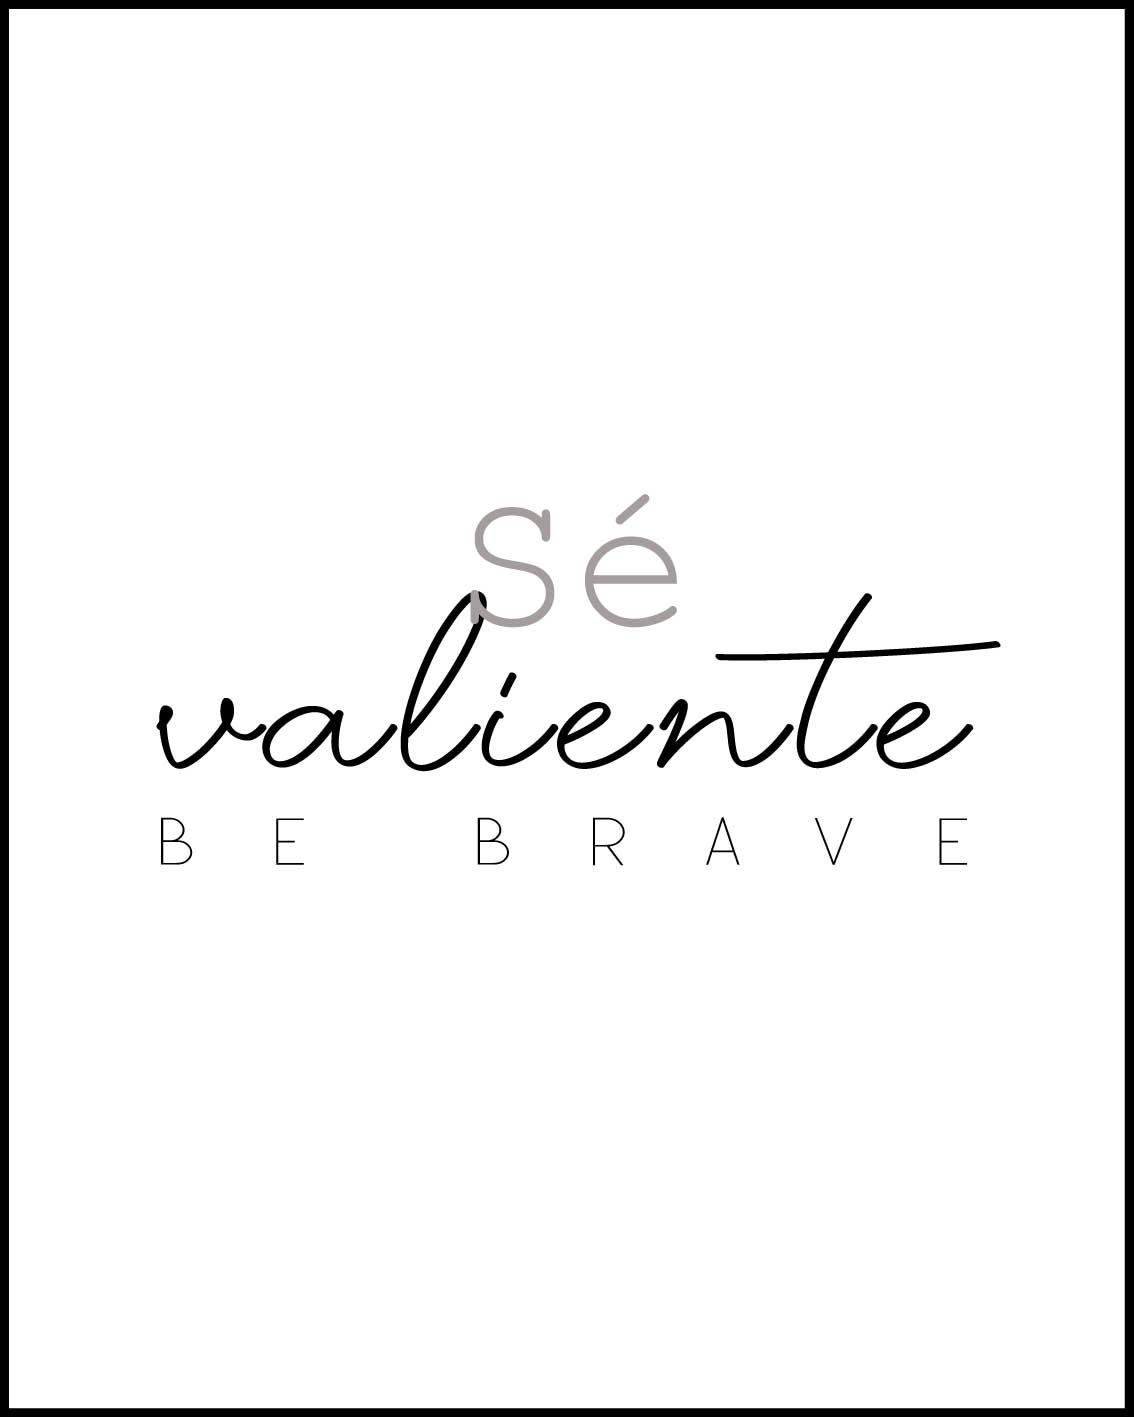 Be Brave Poster